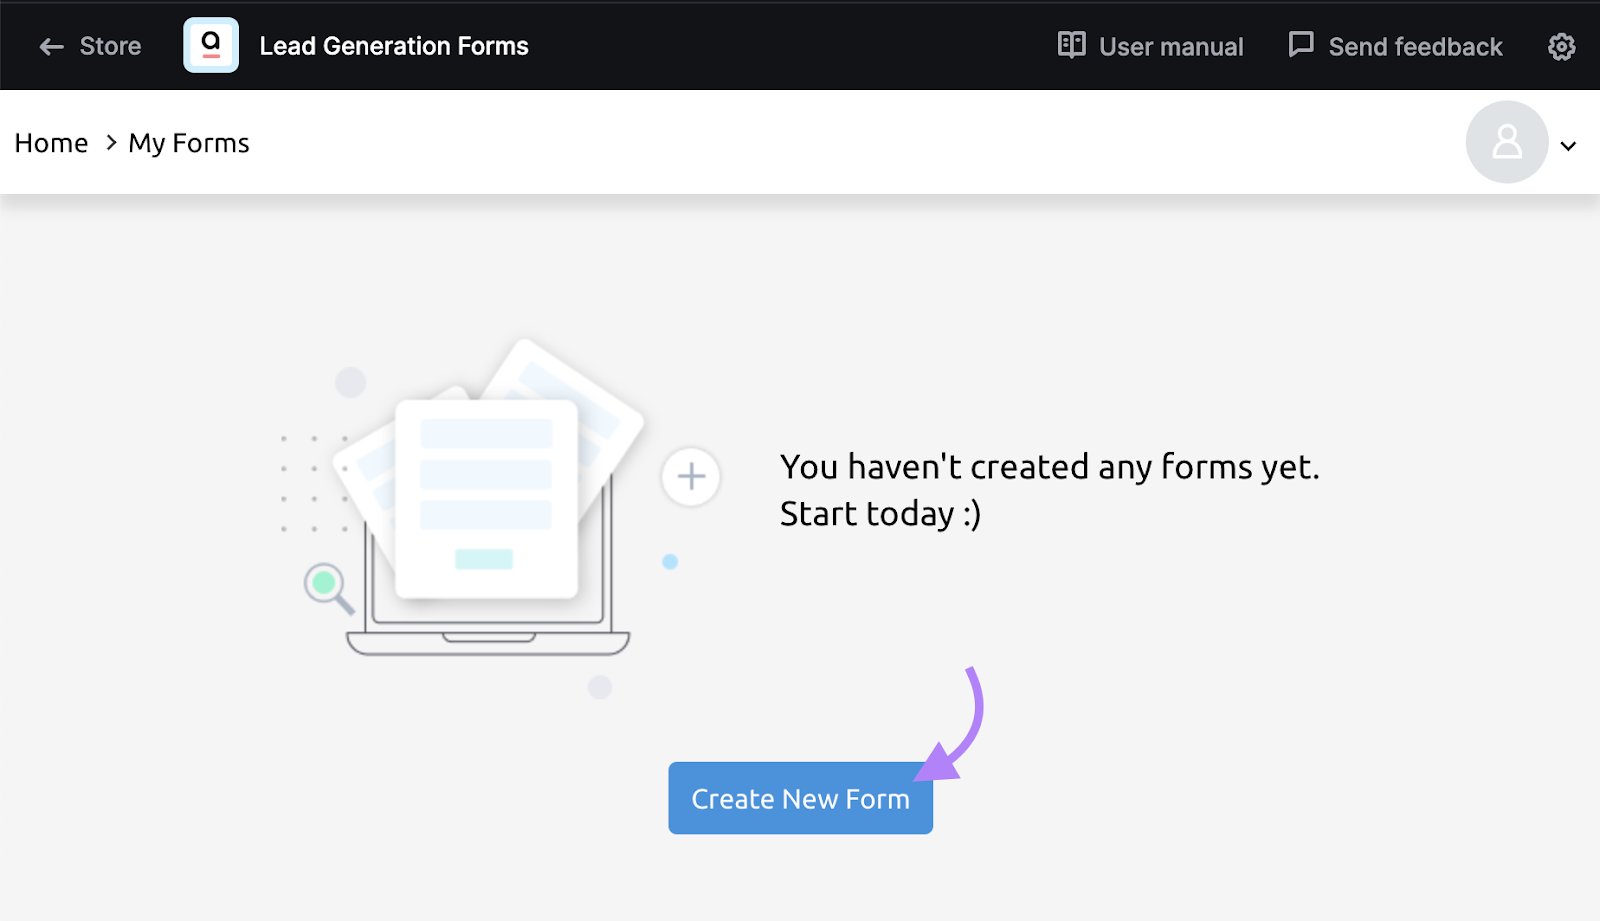 “Create New Form” button in Lead Generation Forms app